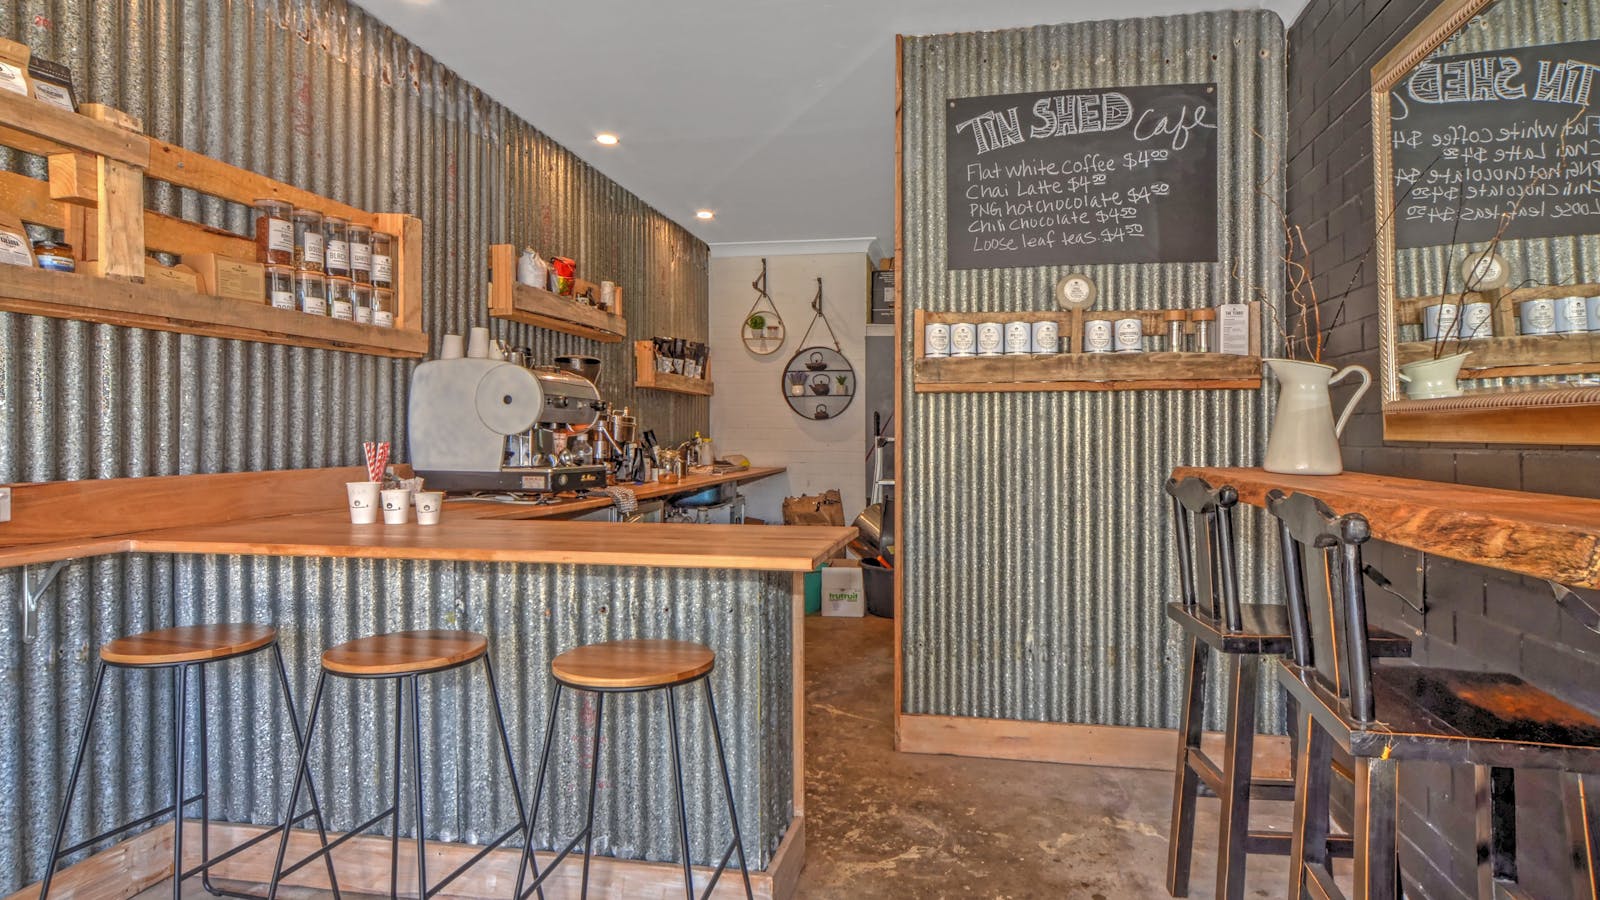 Tin Shed Cafe and Coffee bar